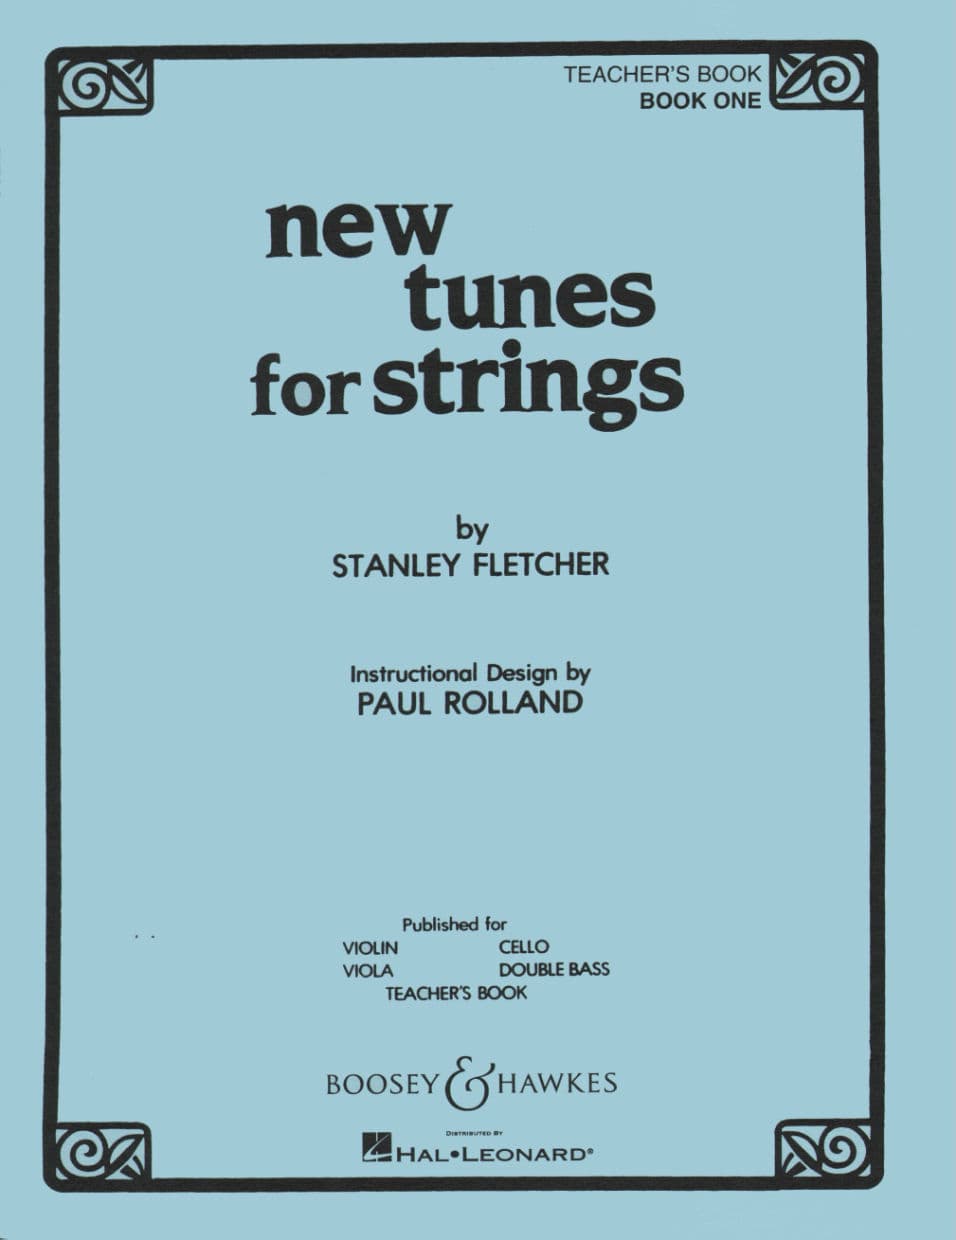 Fletcher, Stanley - New Tunes for Strings, Book 1 - Teacher - Boosey & Hawkes Edition